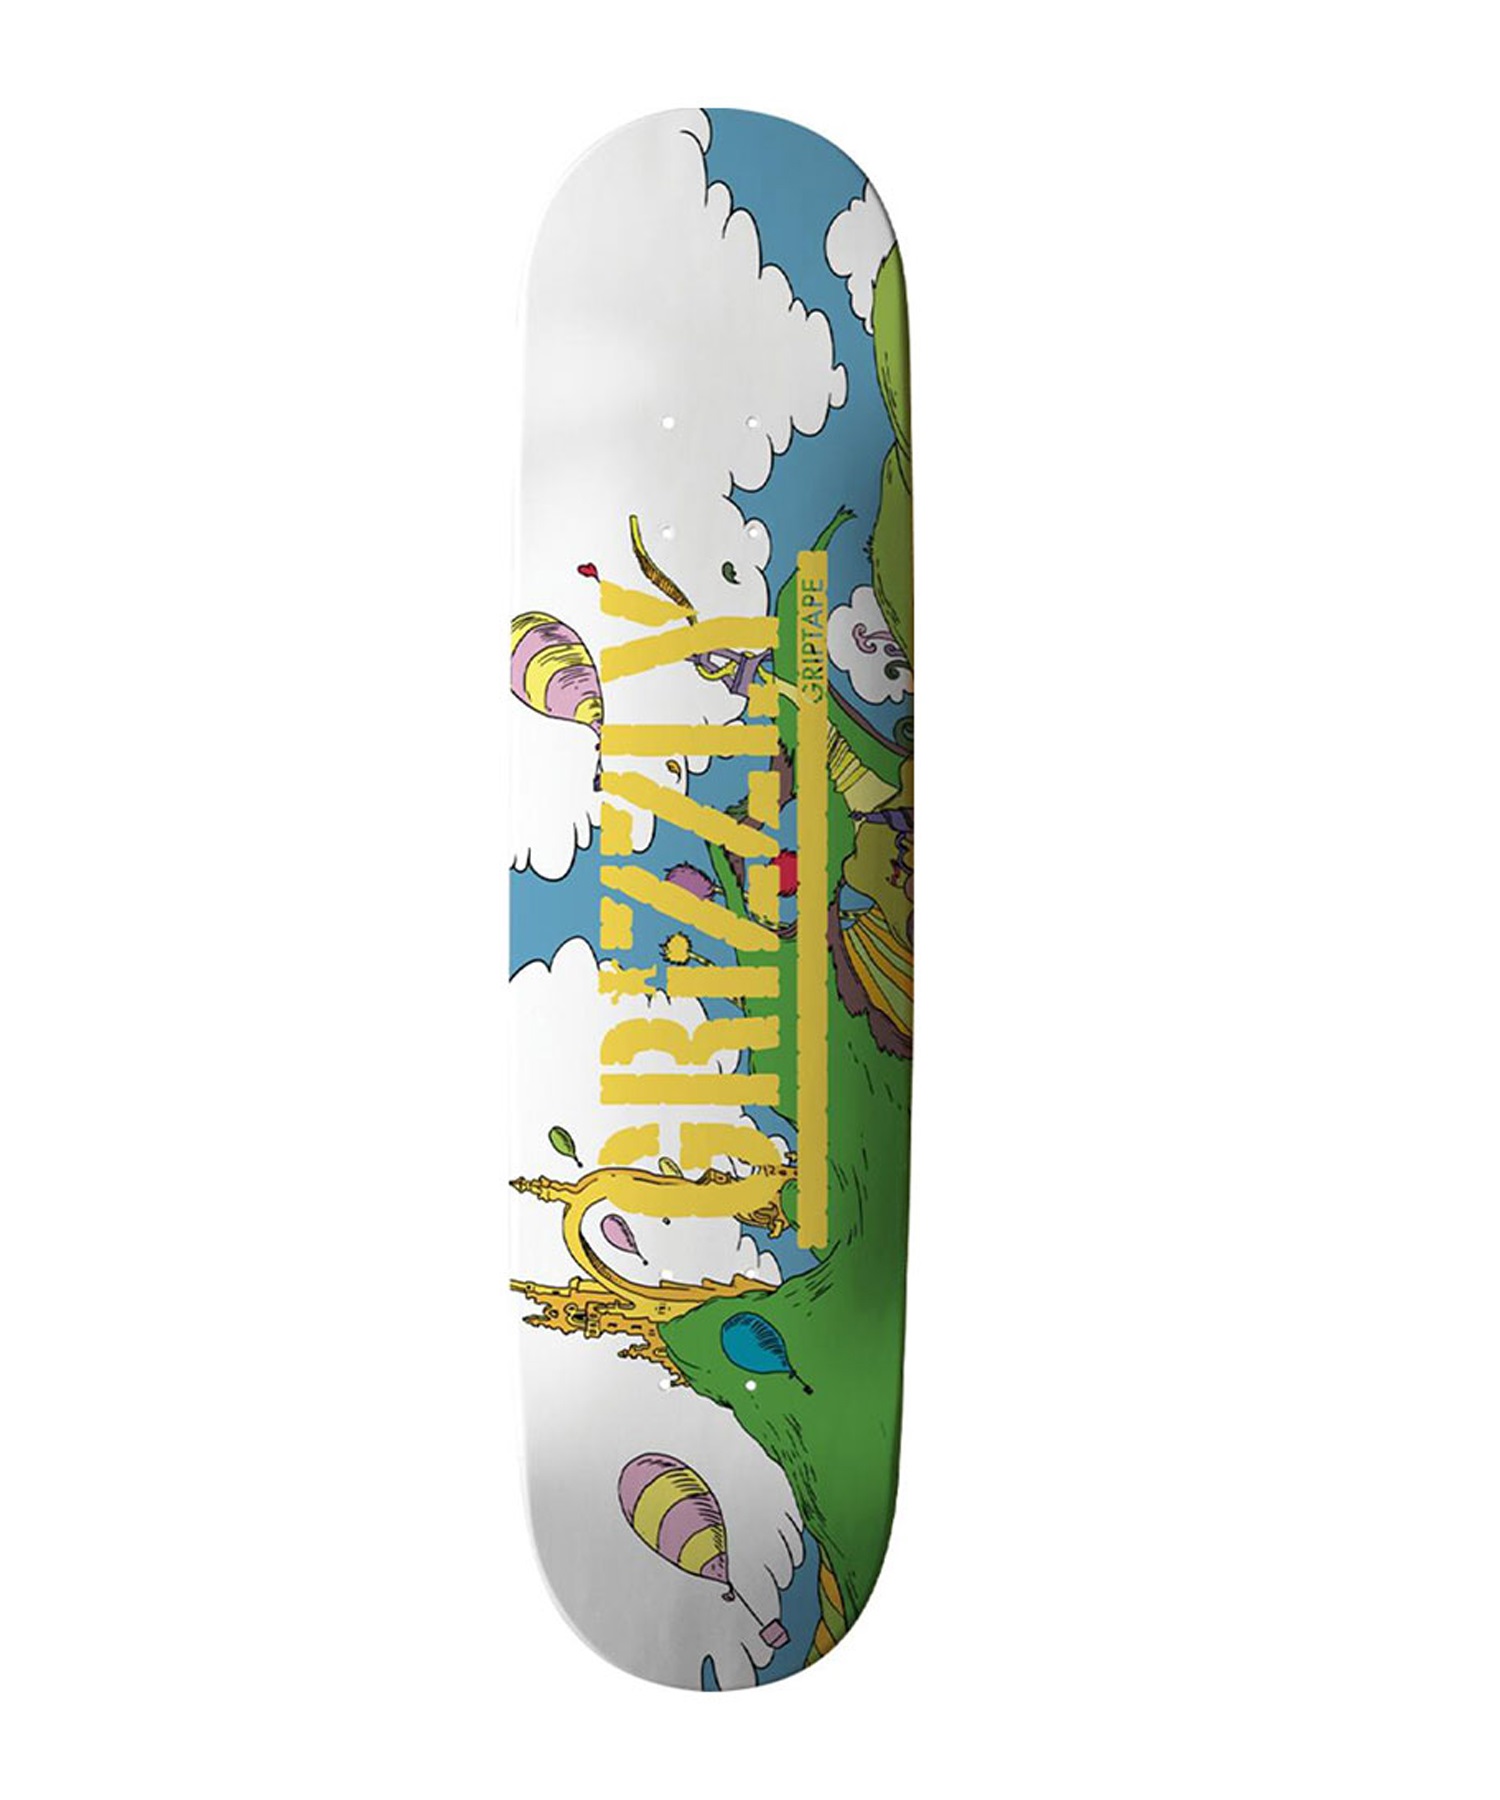 GRIZZLY グリズリー キッズ スケートボード デッキ UP AND AWAY DECK 7.0inch 28.9inch(ONECOLOR-7.00inch)